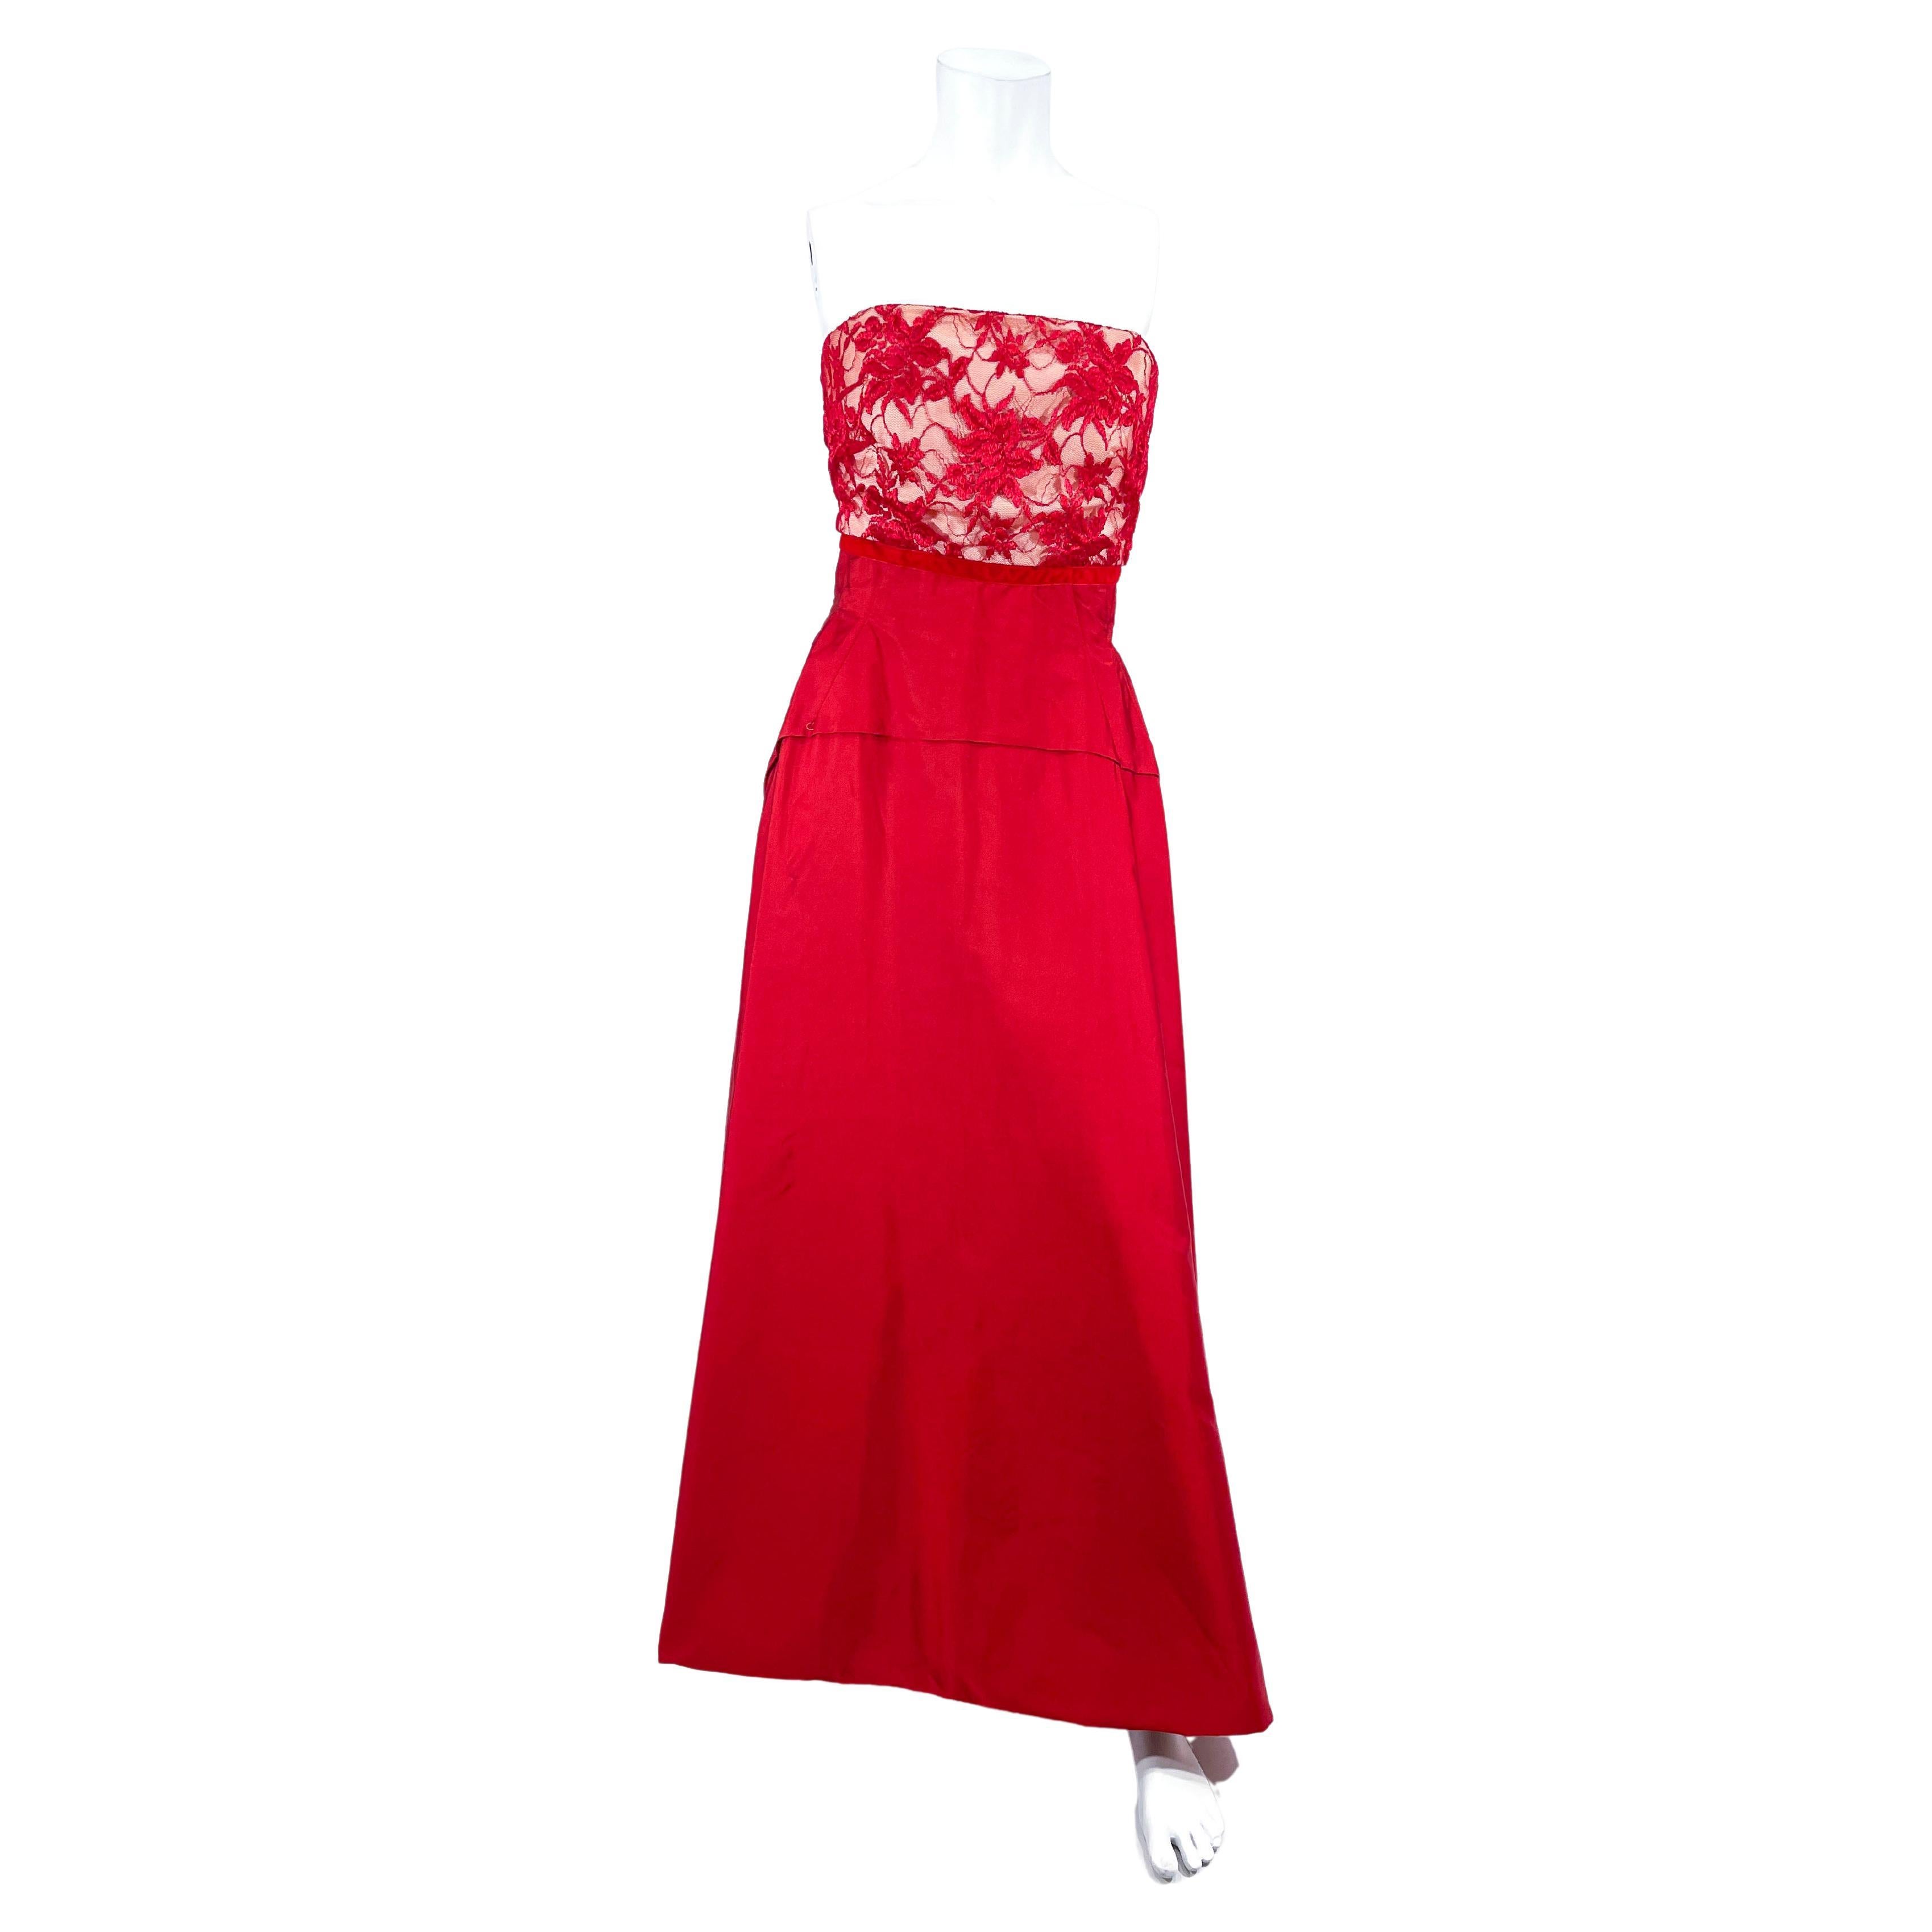 1960s Helena Barbieri Red Satin and Lace Evening Gown